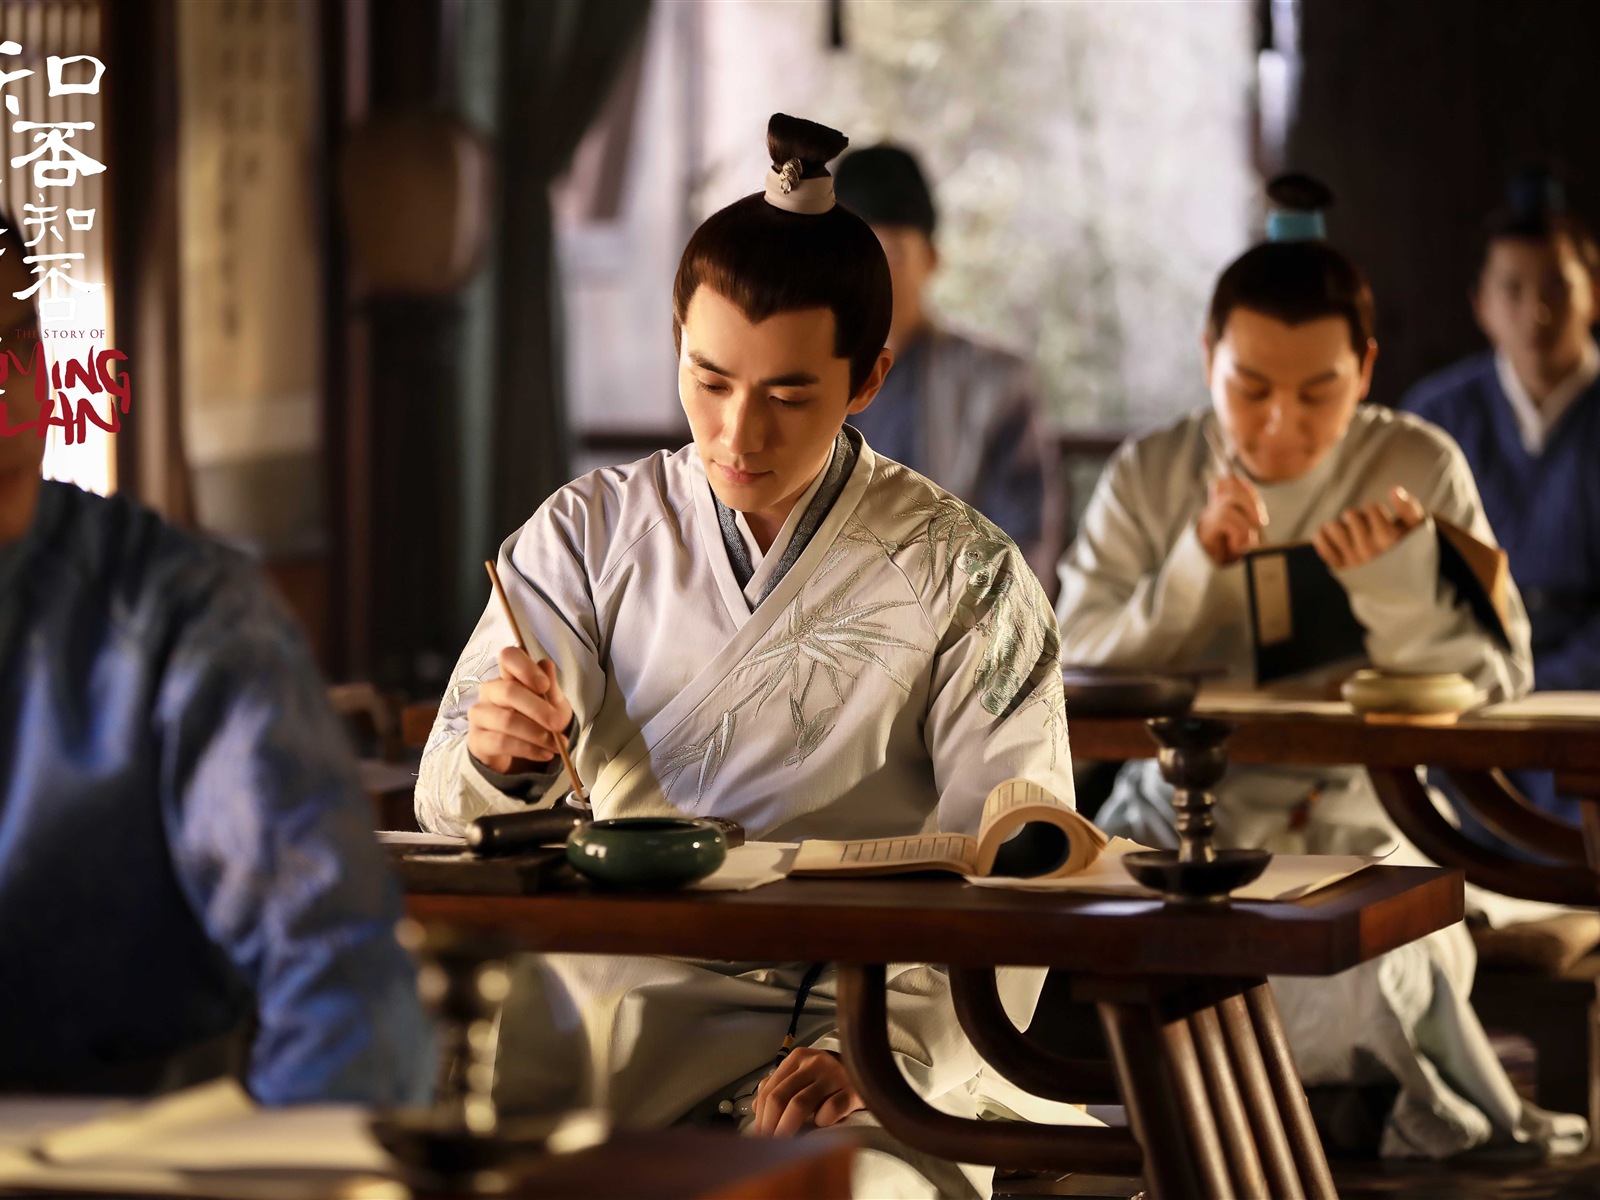 The Story Of MingLan, TV series HD wallpapers #37 - 1600x1200